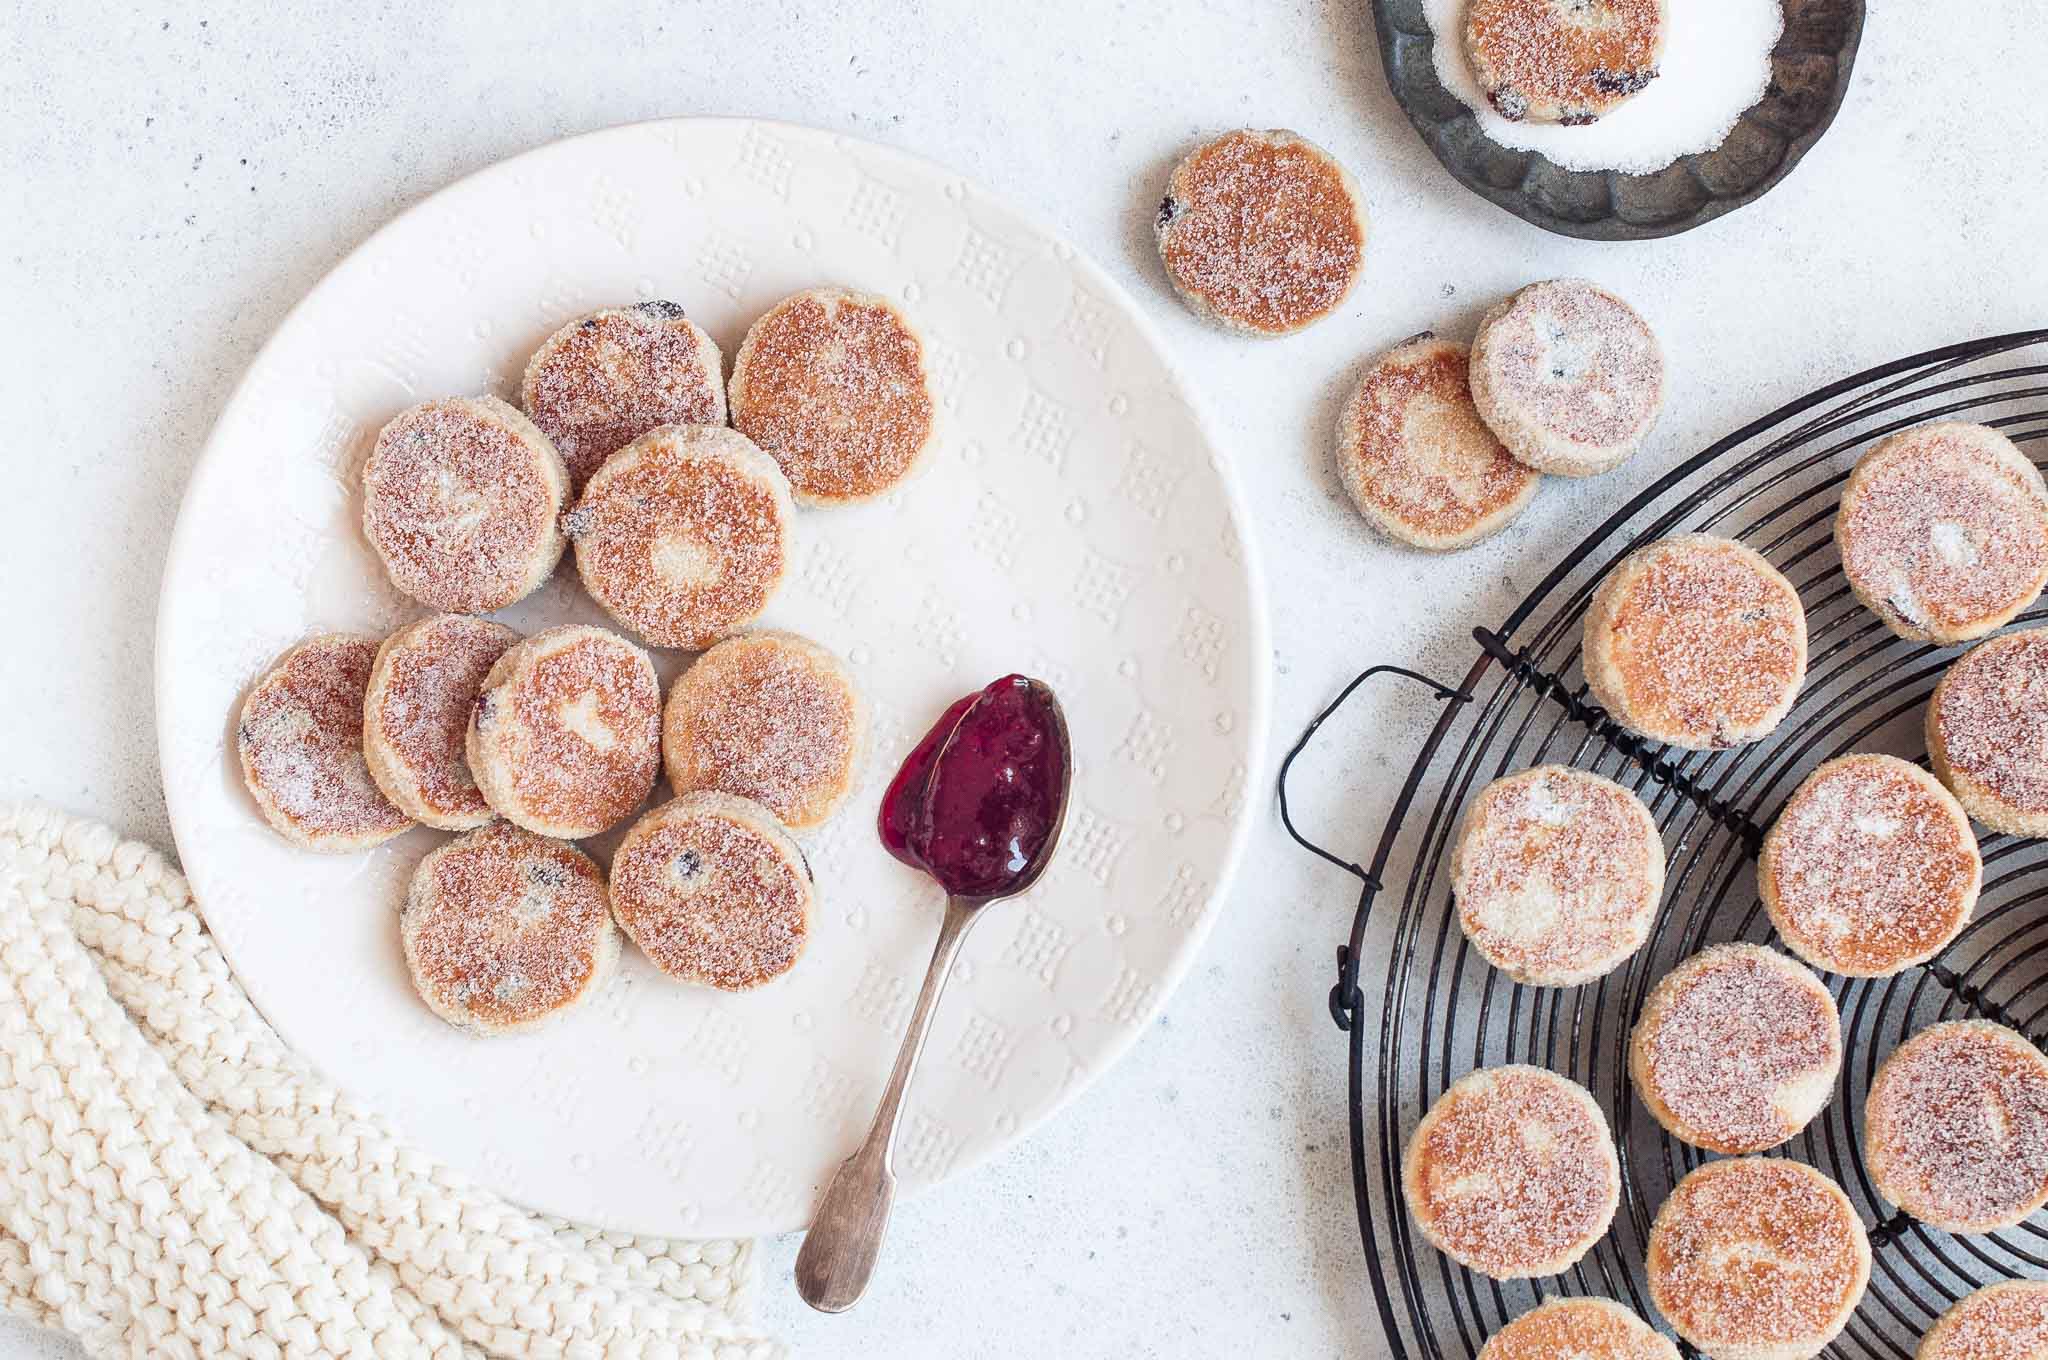 welsh cakes sprinkled in sugar on white plate and metal wire rack